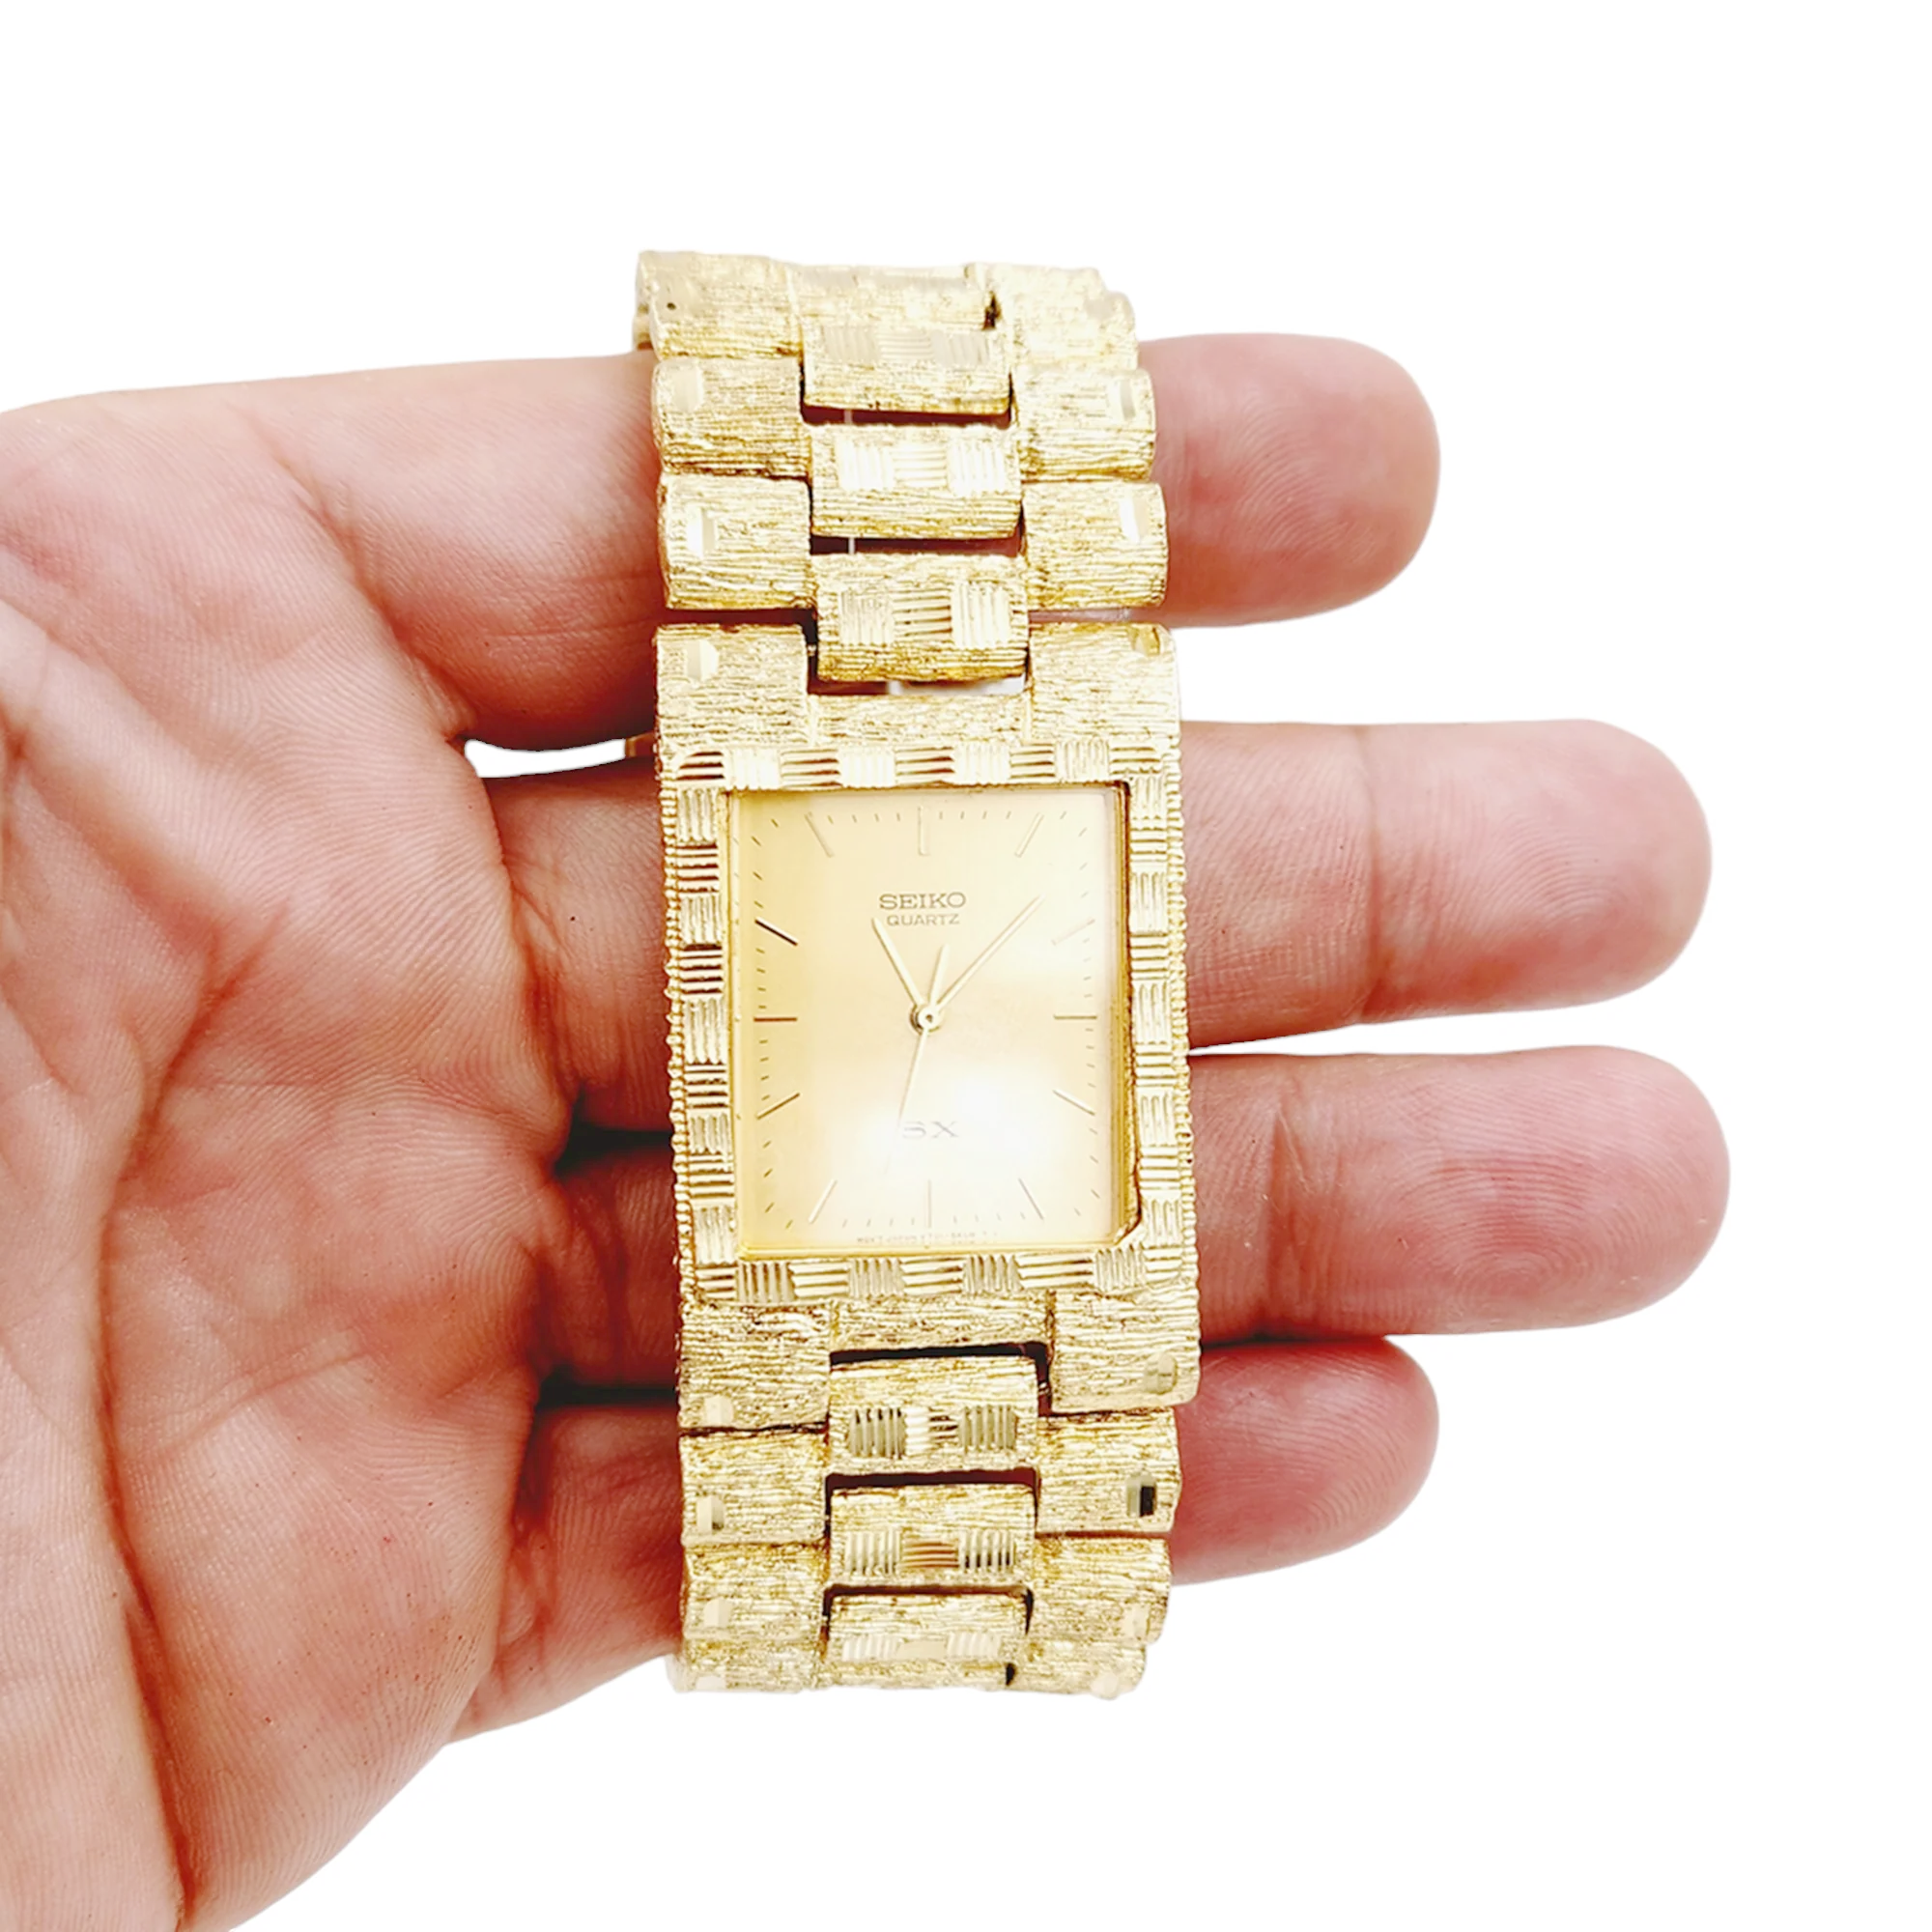 Men's Seiko SX 28mm x 42mm Vintage 14K Yellow Gold Watch with Champagne Dial. (Pre-Owned V701-5K00)